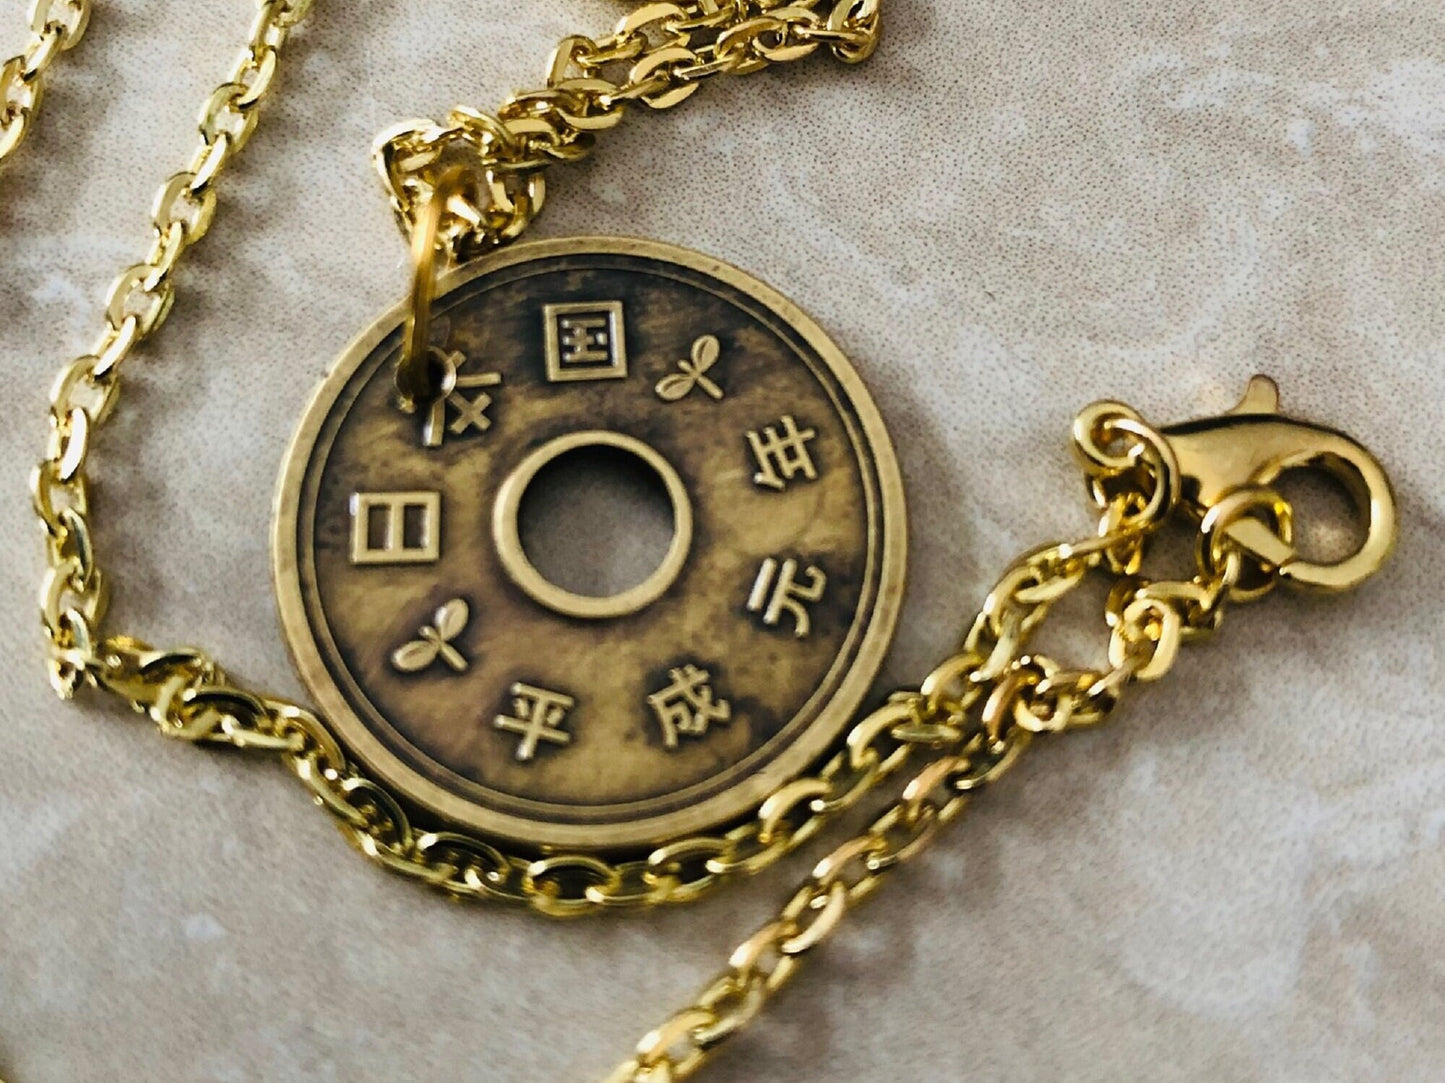 Japan Coin Necklace 5 Yen Pendant Japanese Vintage Rare Jewelry Coins Coin Enthusiast Fashion Accessory Handmade